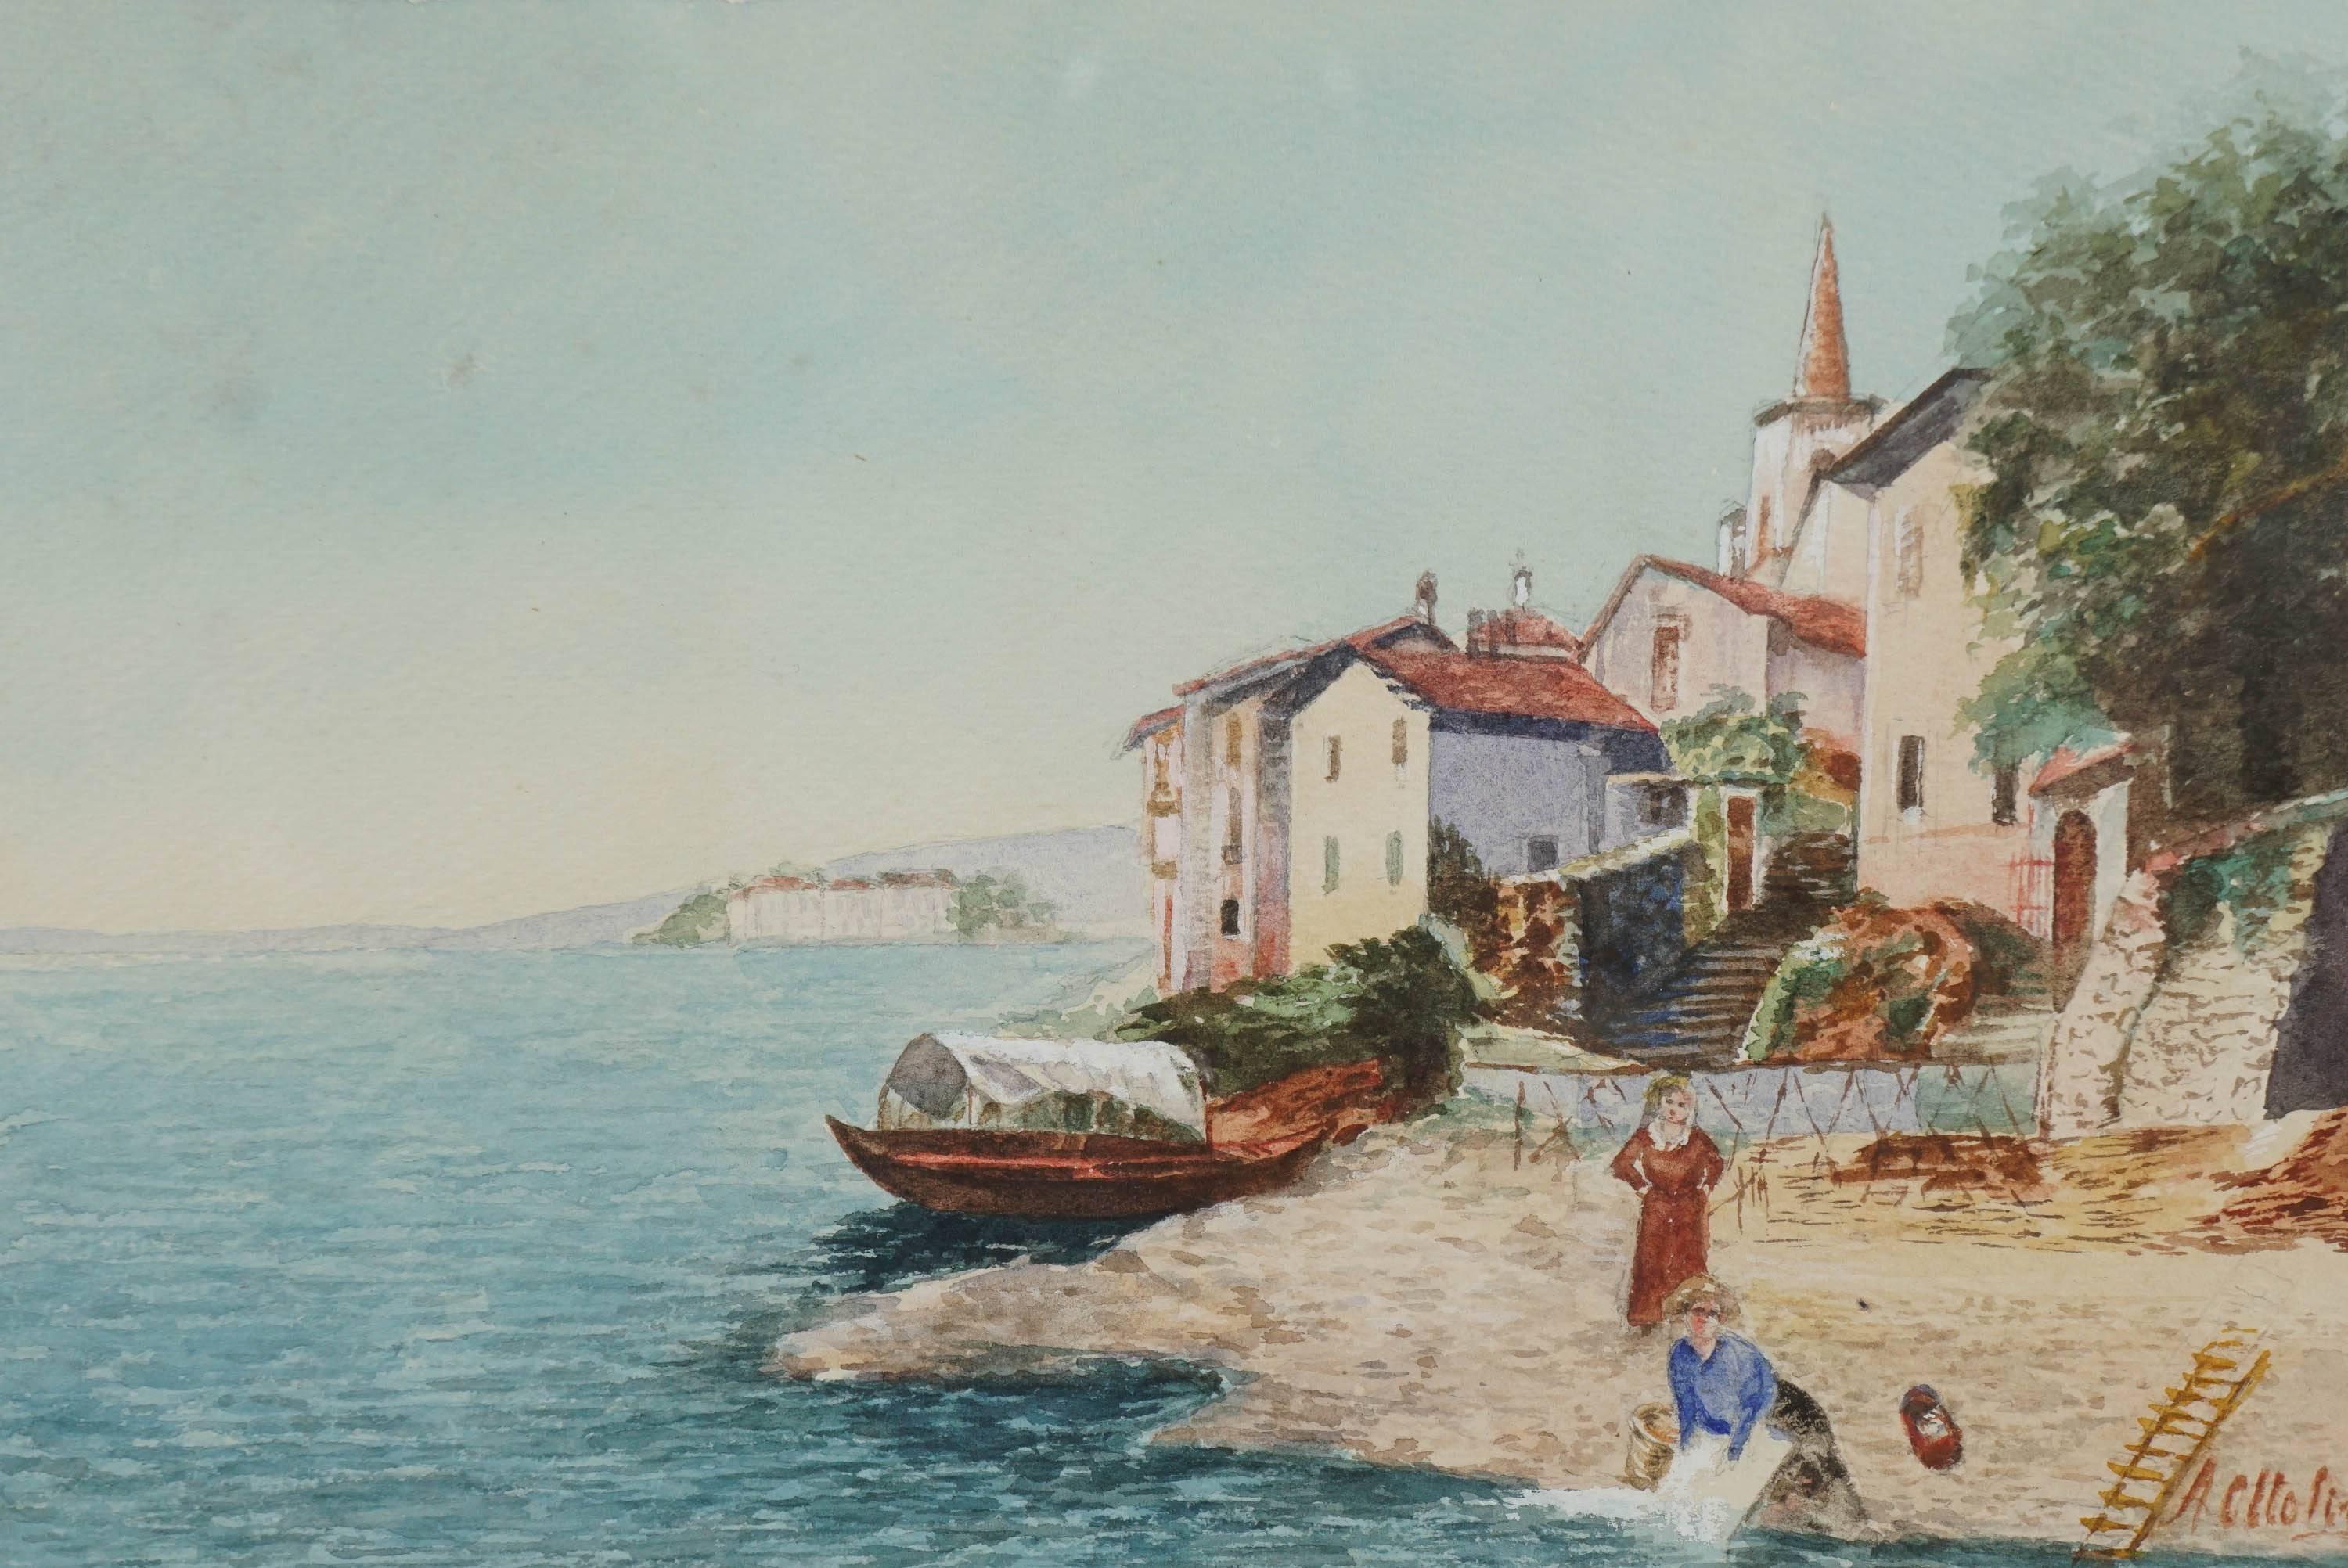 A 'grand tour' watercolor painting on woven paper of an Italian coastal scene with village, boat, and washer-women on shore housed in a giltwood frame with lamb's tongue fillet and compound French mat. Signed lower left corner. Work: 11.5